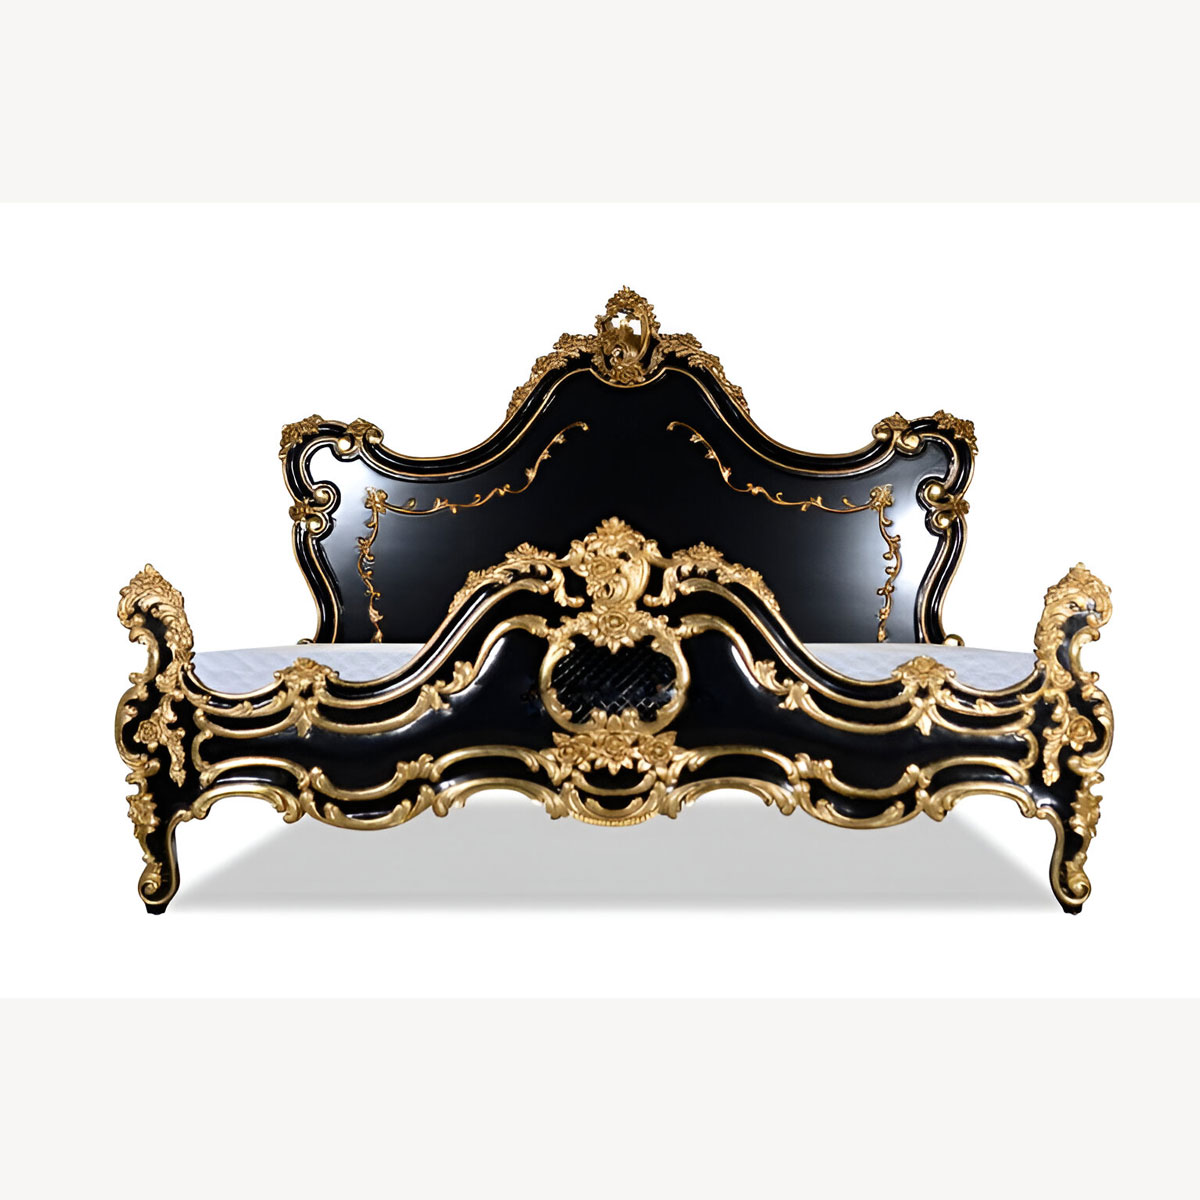 Versailles Ornate Bed In Black With Gold Detailing 1 - Hampshire Barn Interiors - Versailles Ornate Bed In Black With Gold Detailing -